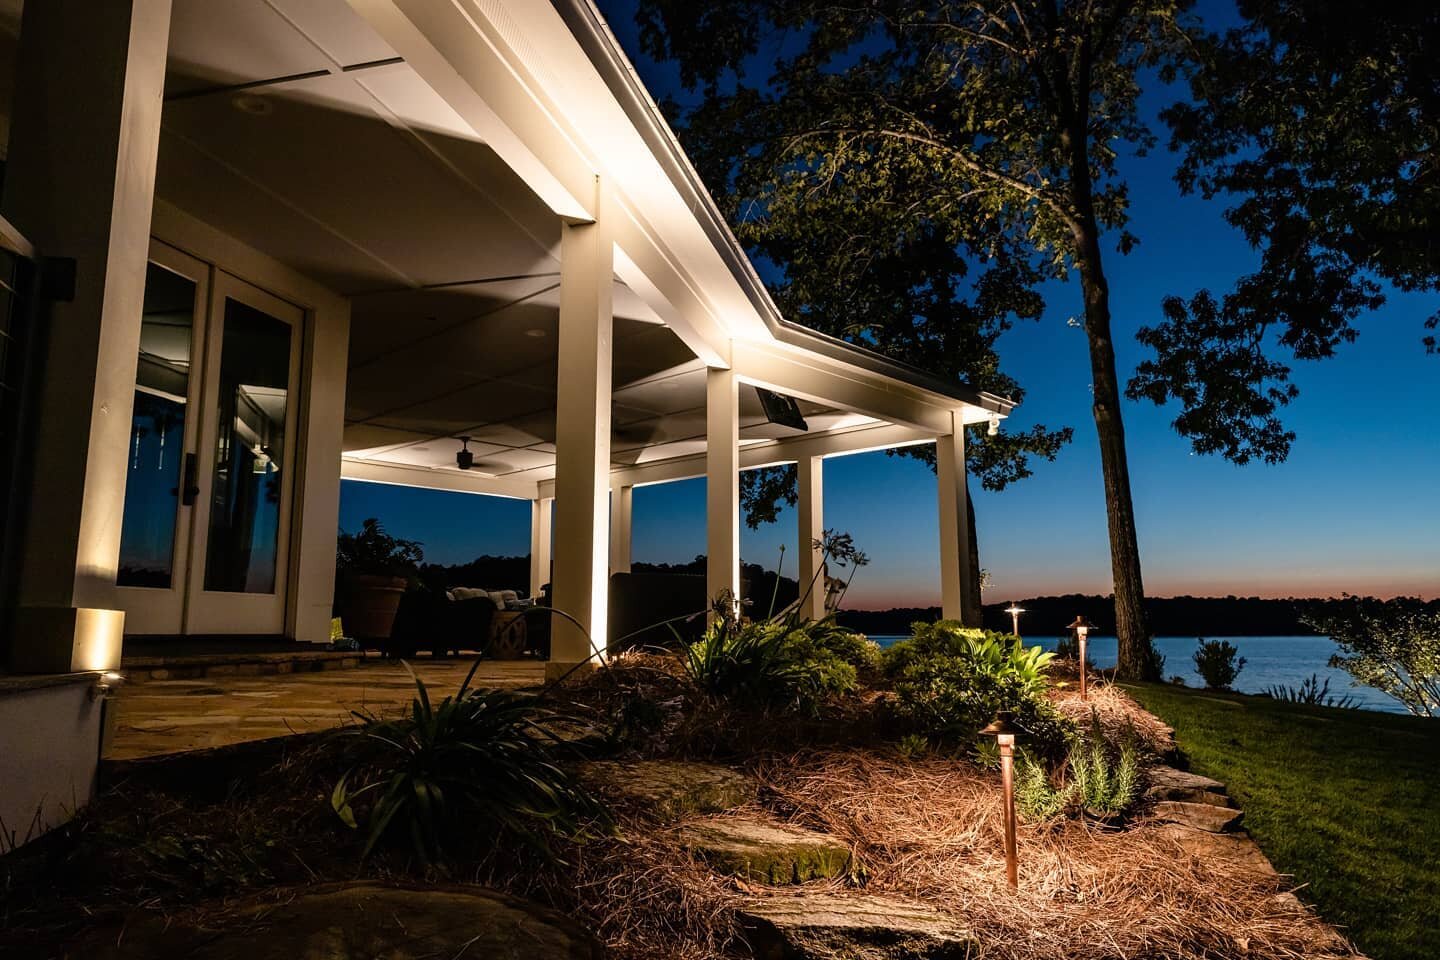 Returning to this Lake House project in the evening for photos was a great experience! It's hard to beat sunsets at the lake, but we might argue that dusk on the water, surrounded by the glow of beautiful landscape lighting, is a pretty close second.